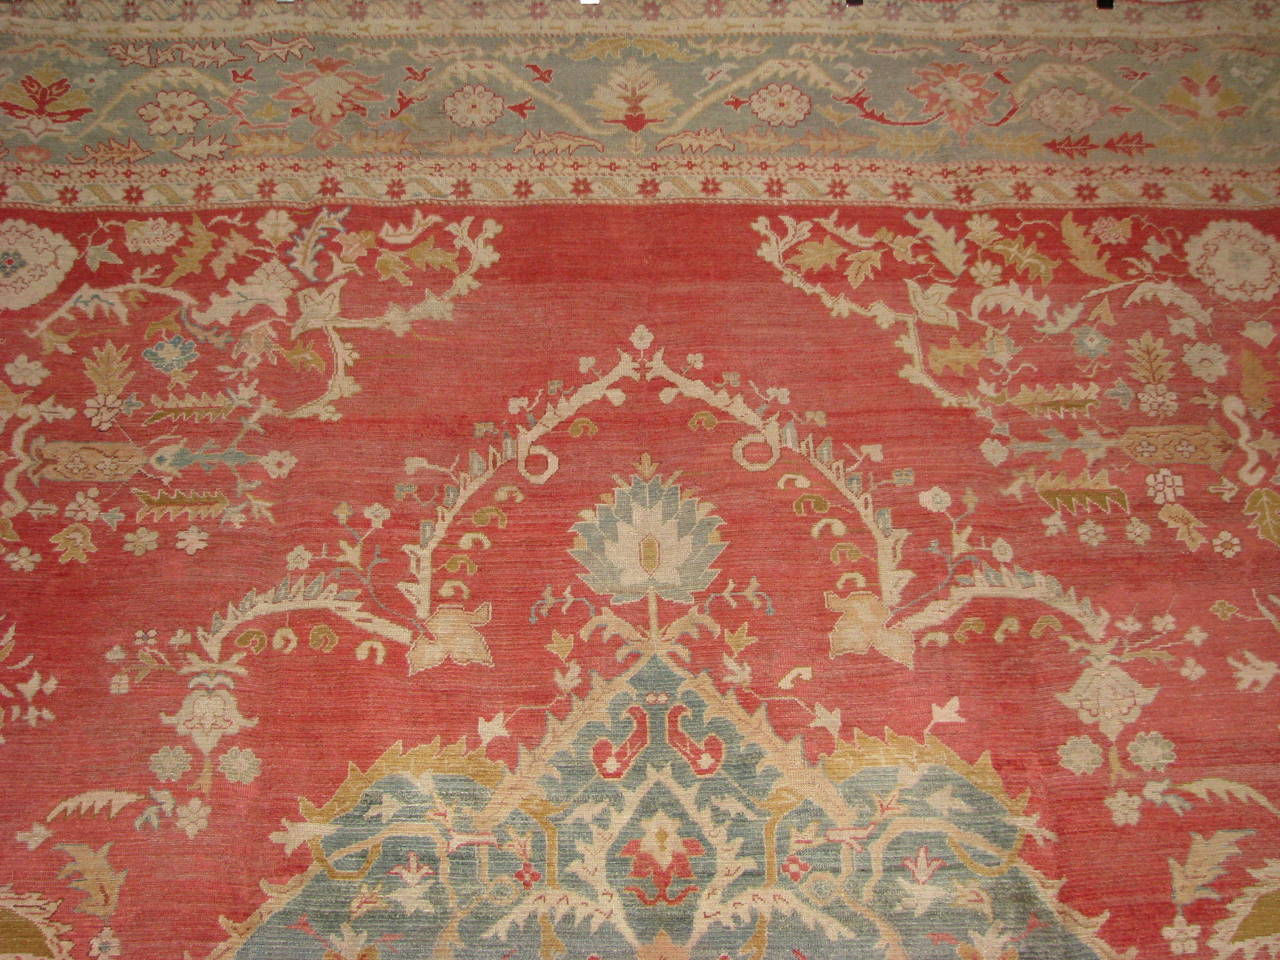 Oushak rugs (also spelled Usak or Ushak) originated in the small town of Oushak in west central Anatolia, which is about 310 miles south of Istanbul, Turkey. Oushak rugs have long been known for their beauty and elegance. These were the favored rugs